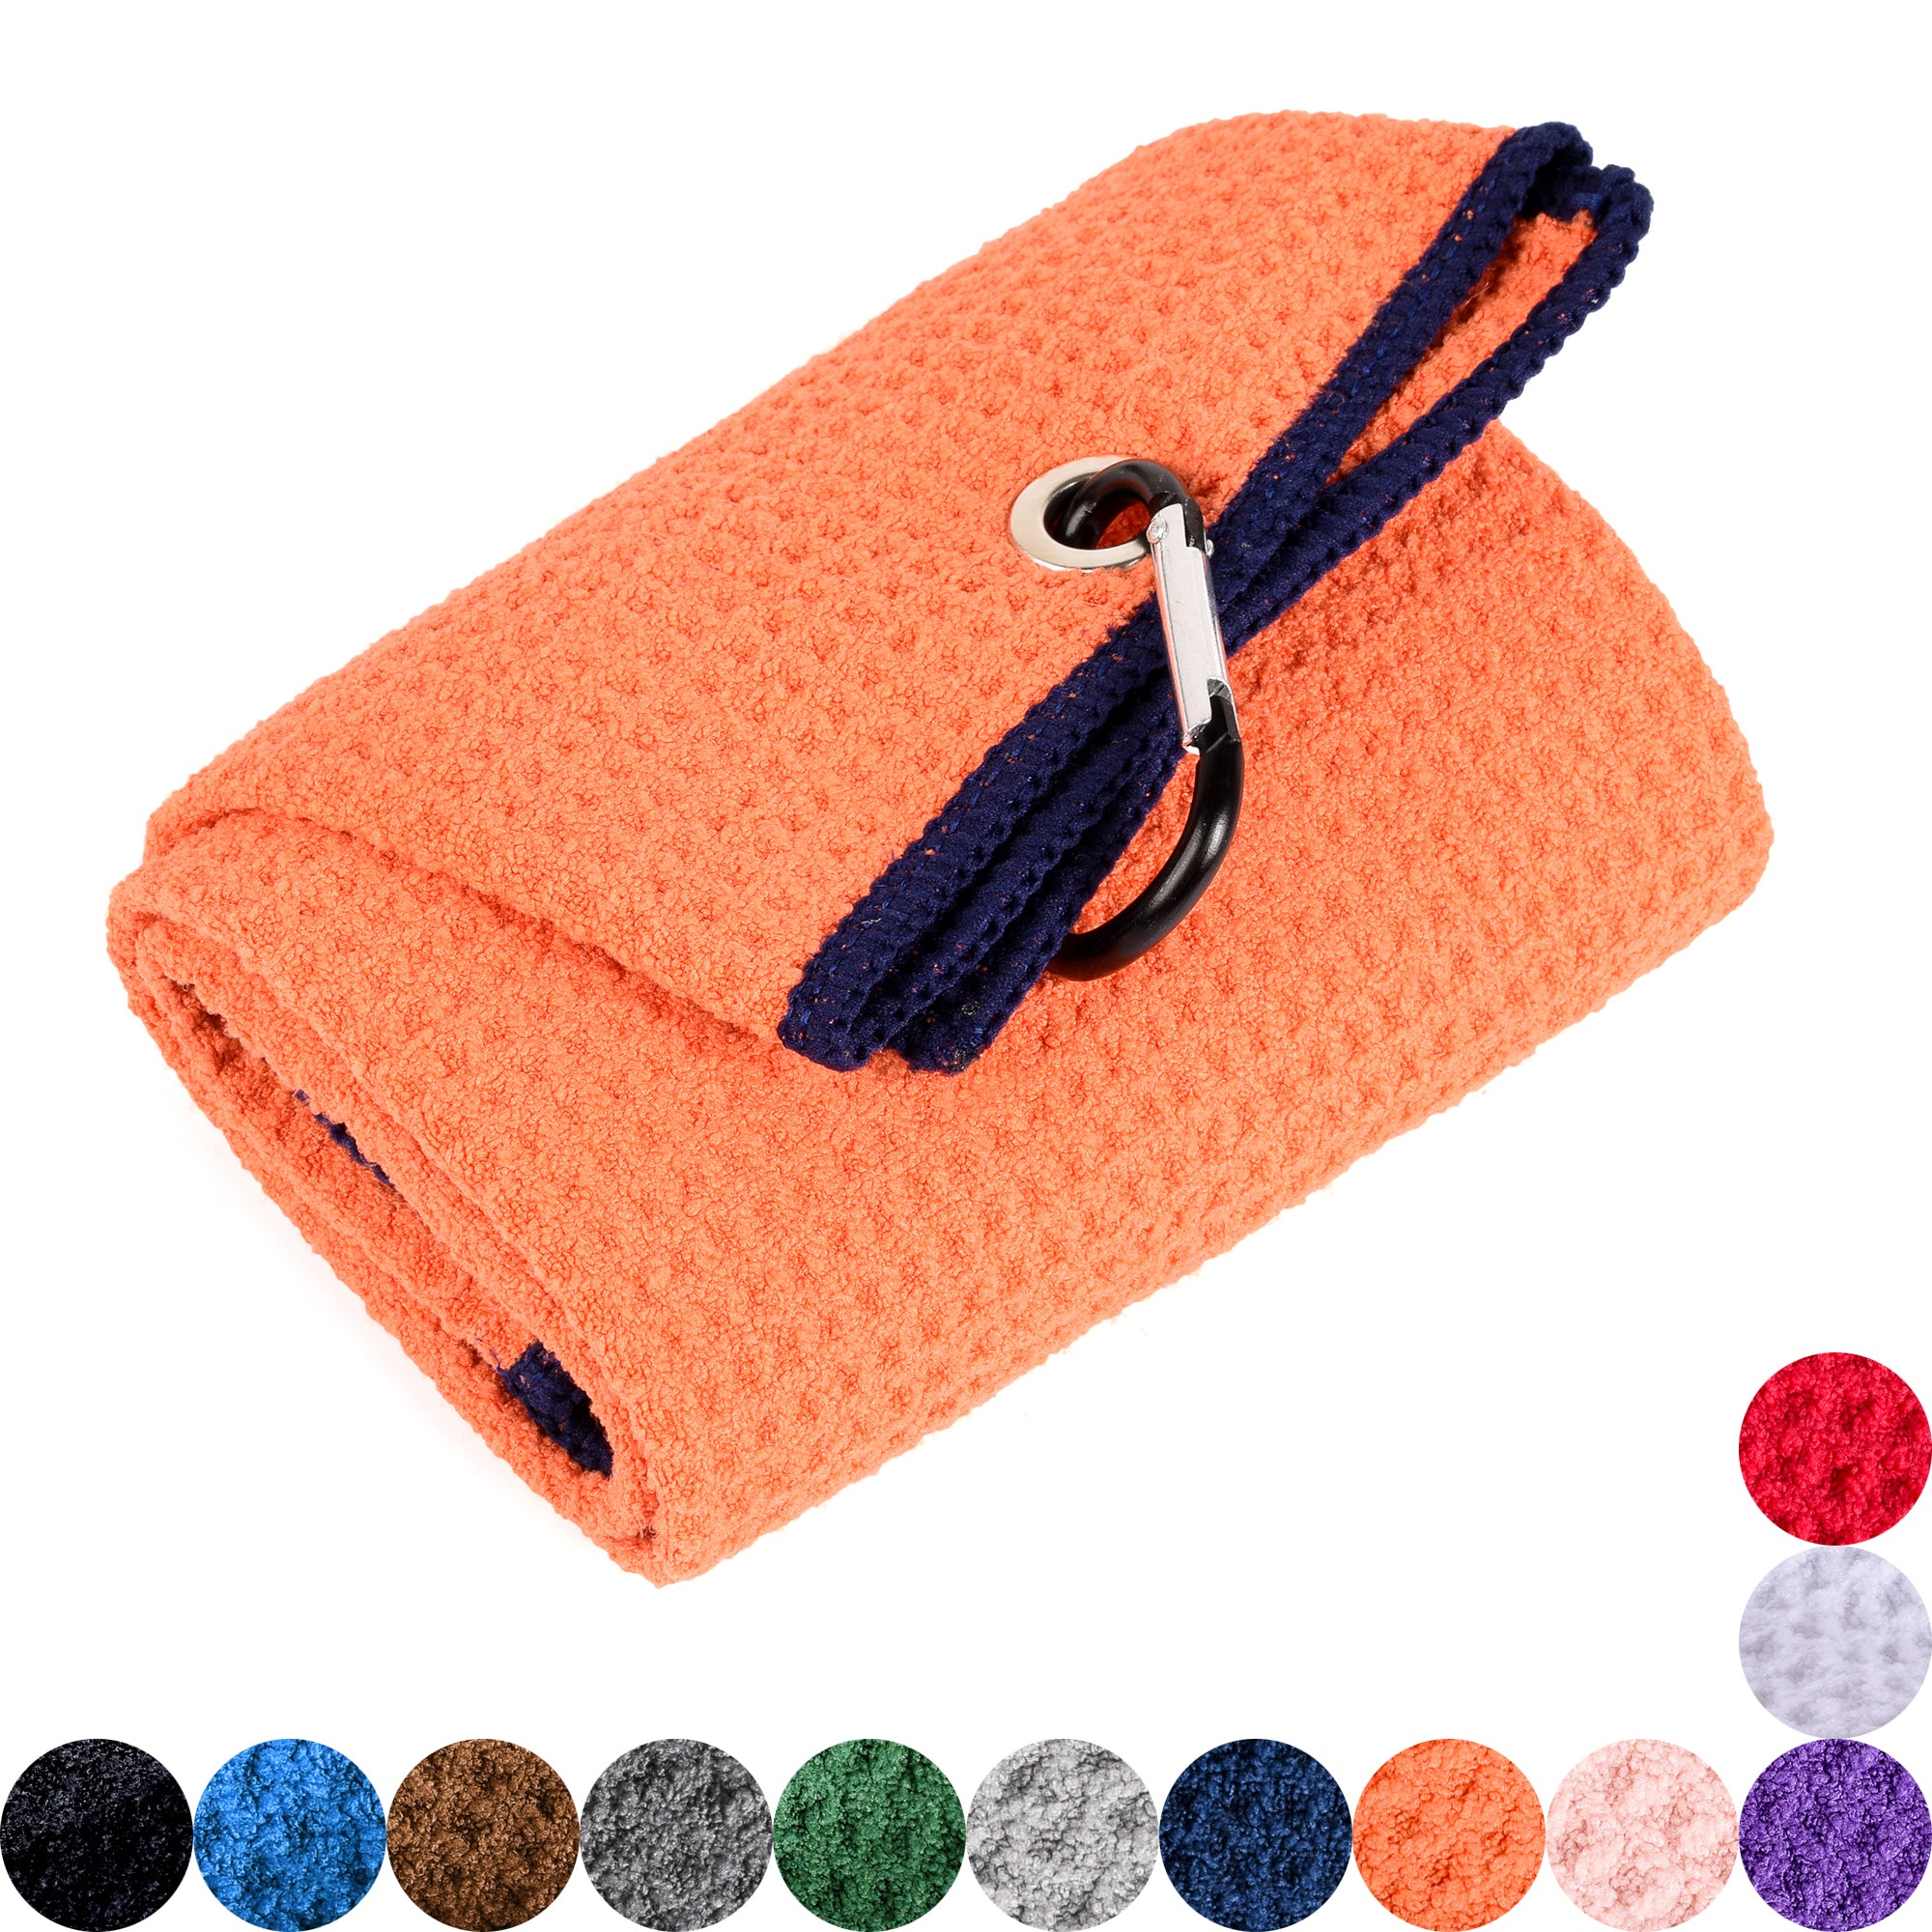 Large Waffle Golf Towel with Hanging Loop - Promotional Giveaway